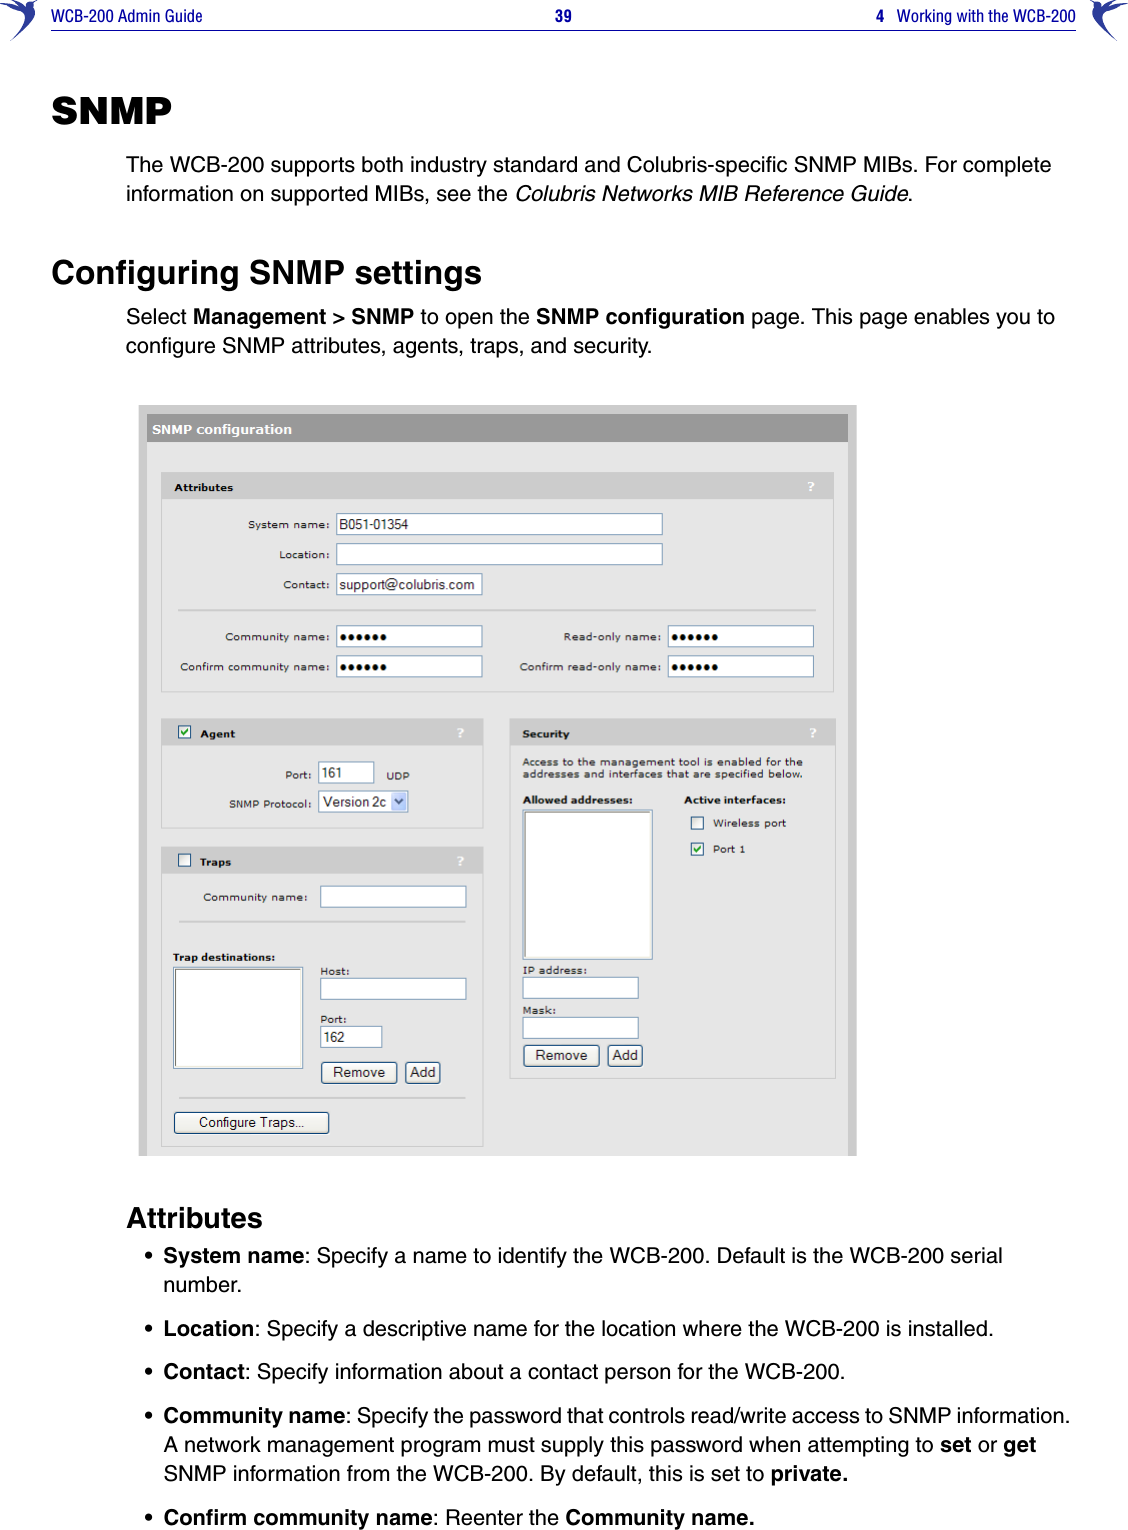 WCB-200 Admin Guide 39 4   Working with the WCB-200SNMPThe WCB-200 supports both industry standard and Colubris-specific SNMP MIBs. For complete information on supported MIBs, see the Colubris Networks MIB Reference Guide.Configuring SNMP settingsSelect Management &gt; SNMP to open the SNMP configuration page. This page enables you to configure SNMP attributes, agents, traps, and security.Attributes• System name: Specify a name to identify the WCB-200. Default is the WCB-200 serial number.• Location: Specify a descriptive name for the location where the WCB-200 is installed.• Contact: Specify information about a contact person for the WCB-200.• Community name: Specify the password that controls read/write access to SNMP information. A network management program must supply this password when attempting to set or get SNMP information from the WCB-200. By default, this is set to private.• Confirm community name: Reenter the Community name.